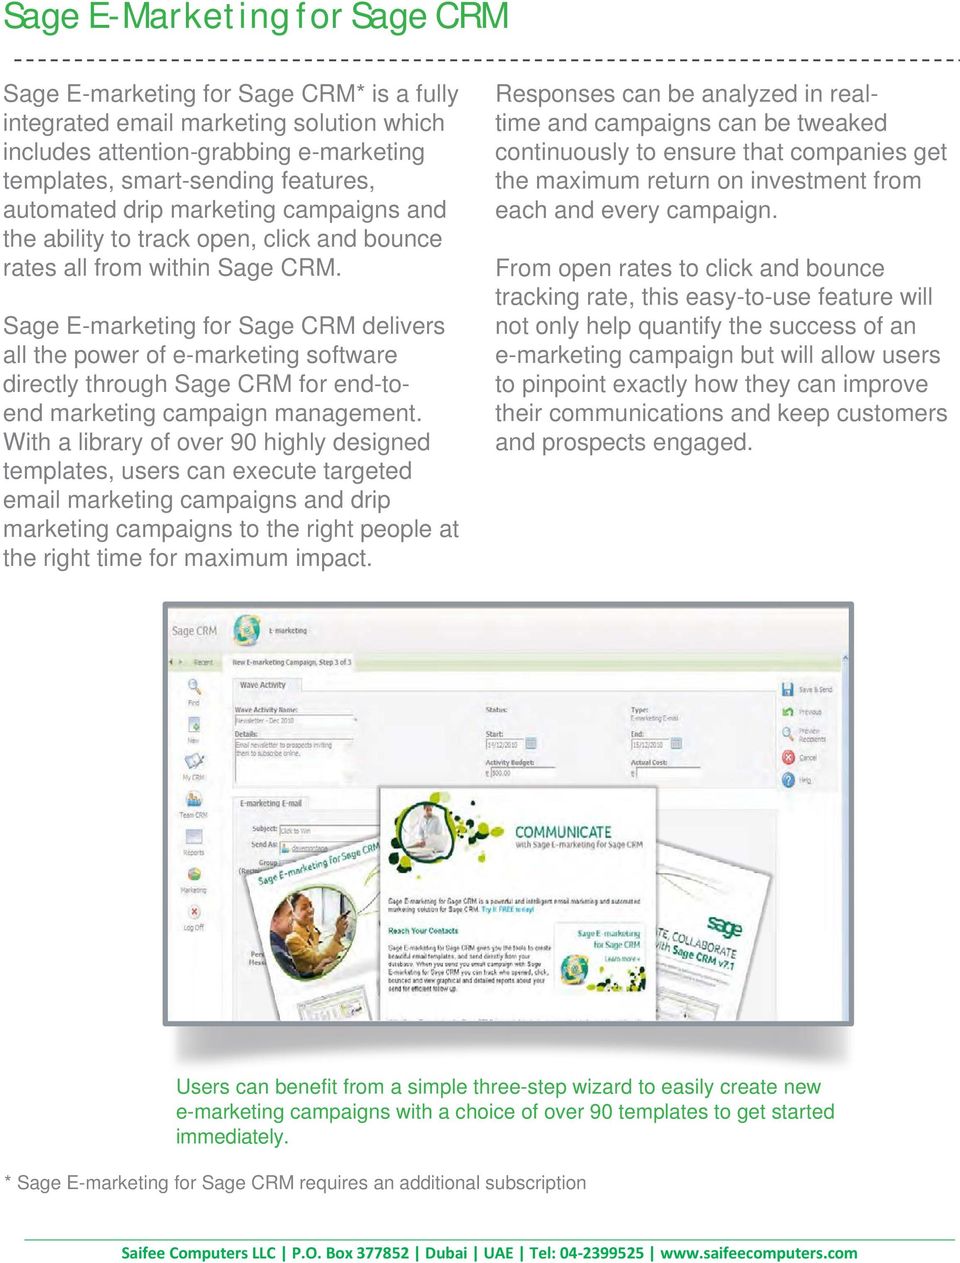 Sage E-marketing for Sage CRM delivers all the power of e-marketing software directly through Sage CRM for end-toend marketing campaign management.